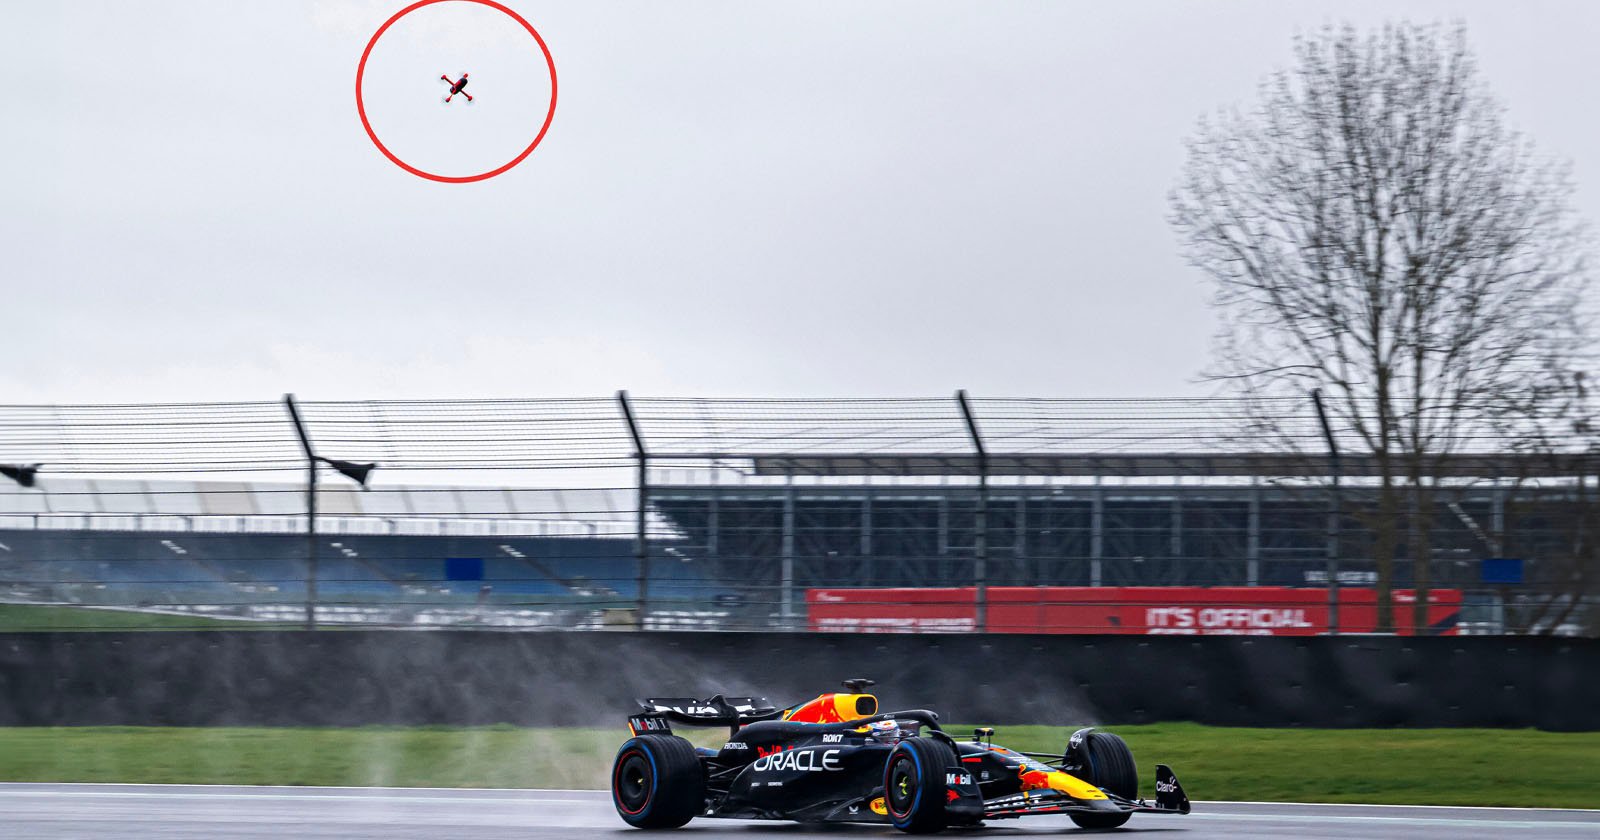 Can The Worlds Fastest Camera Drone Match F1 Champion Max Verstappen?